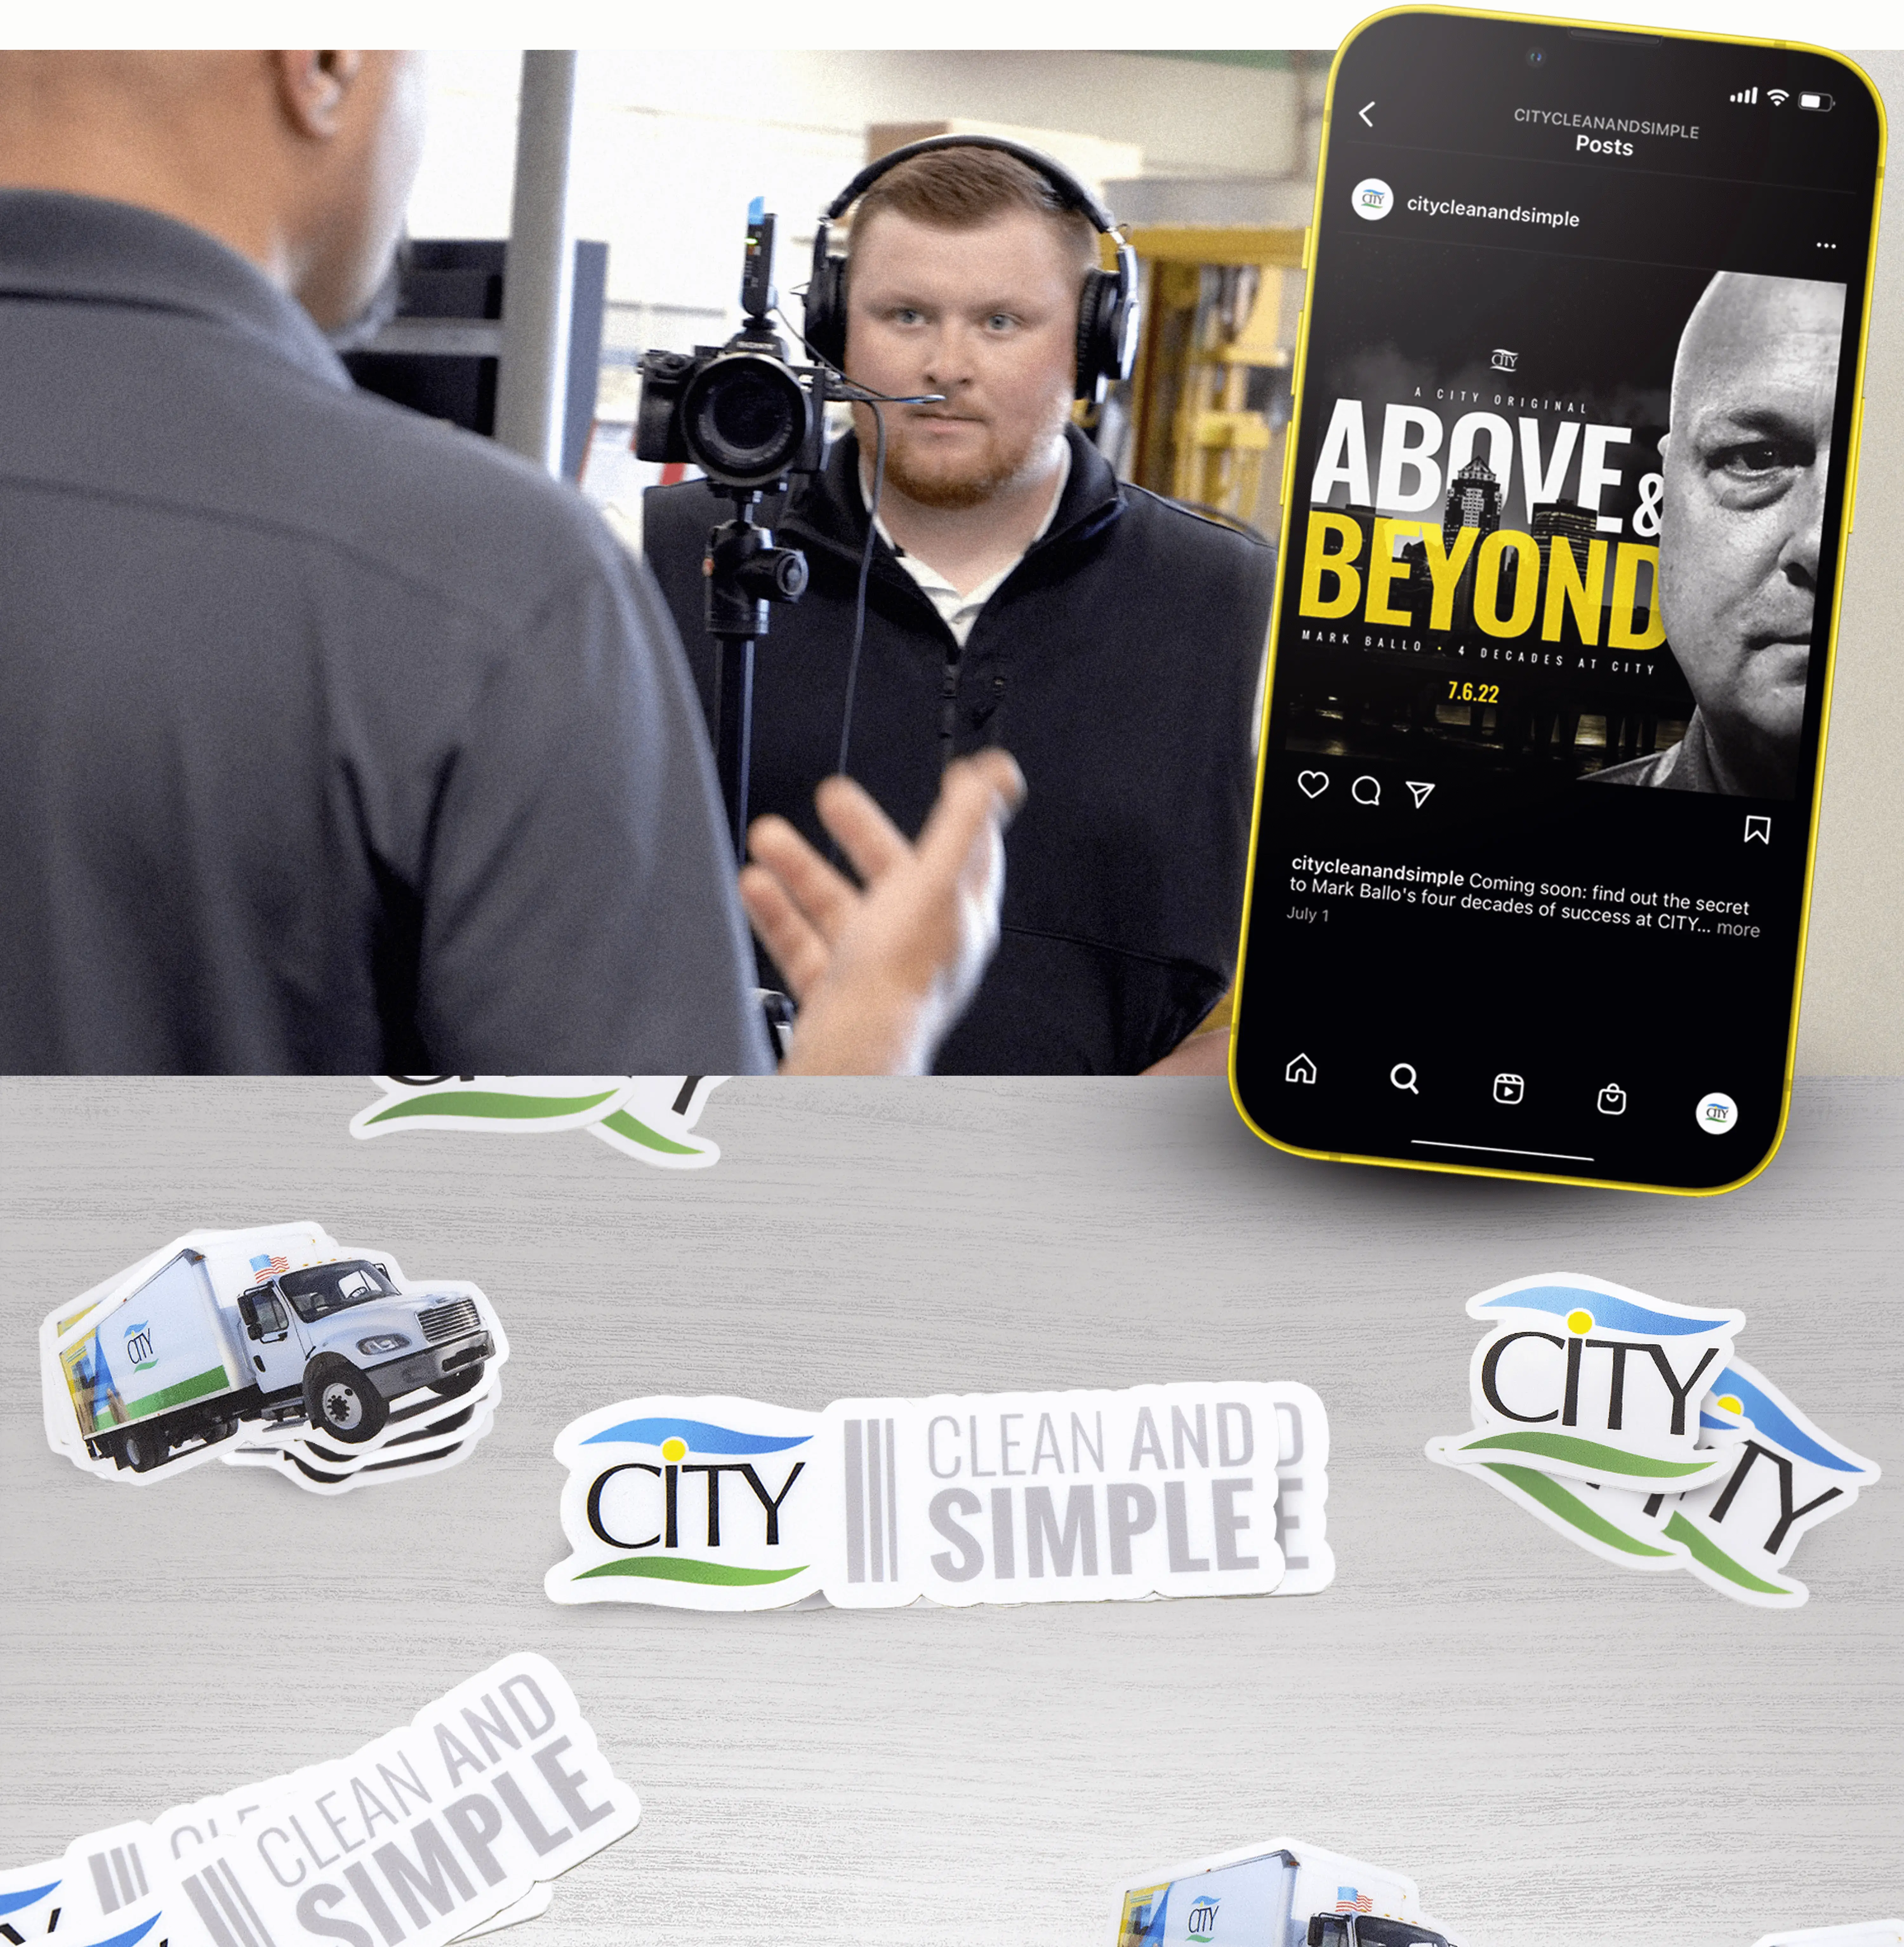 iPhone overlayed onto Videographer image with CITY Sticker examples below